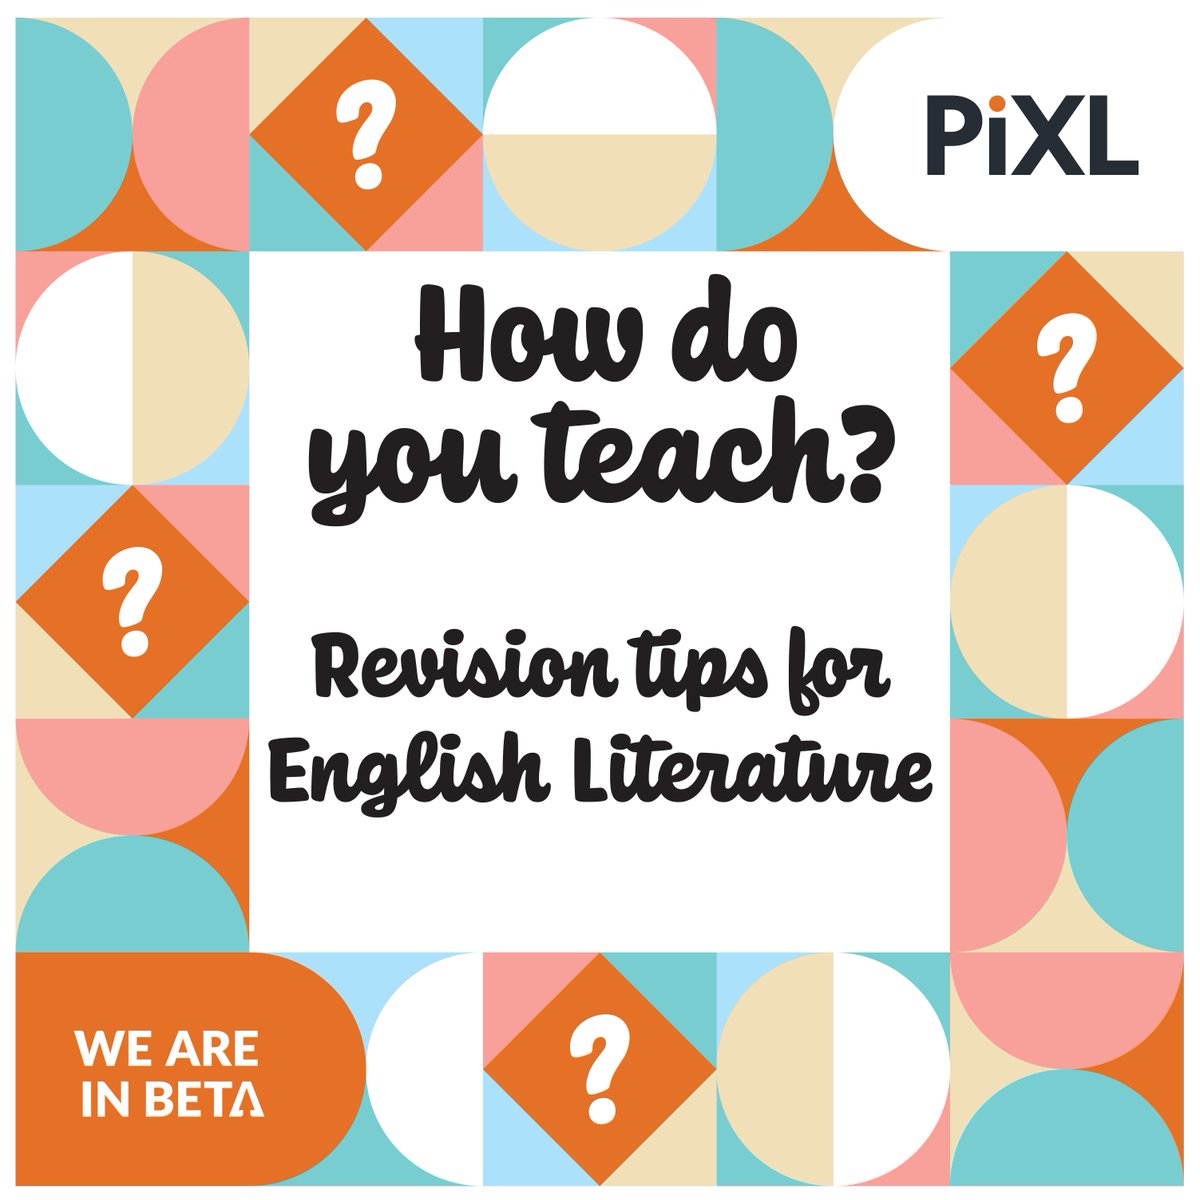 'HDYT?' is back 🙌 Join @RachelPiXL & stellar educators Ashley Harris, Amy Weir, and Josh Sheehan as they let us in on their most effective revision techniques for English Literature! 📖 Tune in today! 👉ow.ly/ya0k50Rg10l New #podcast episodes every week! #EduPod #GCSE